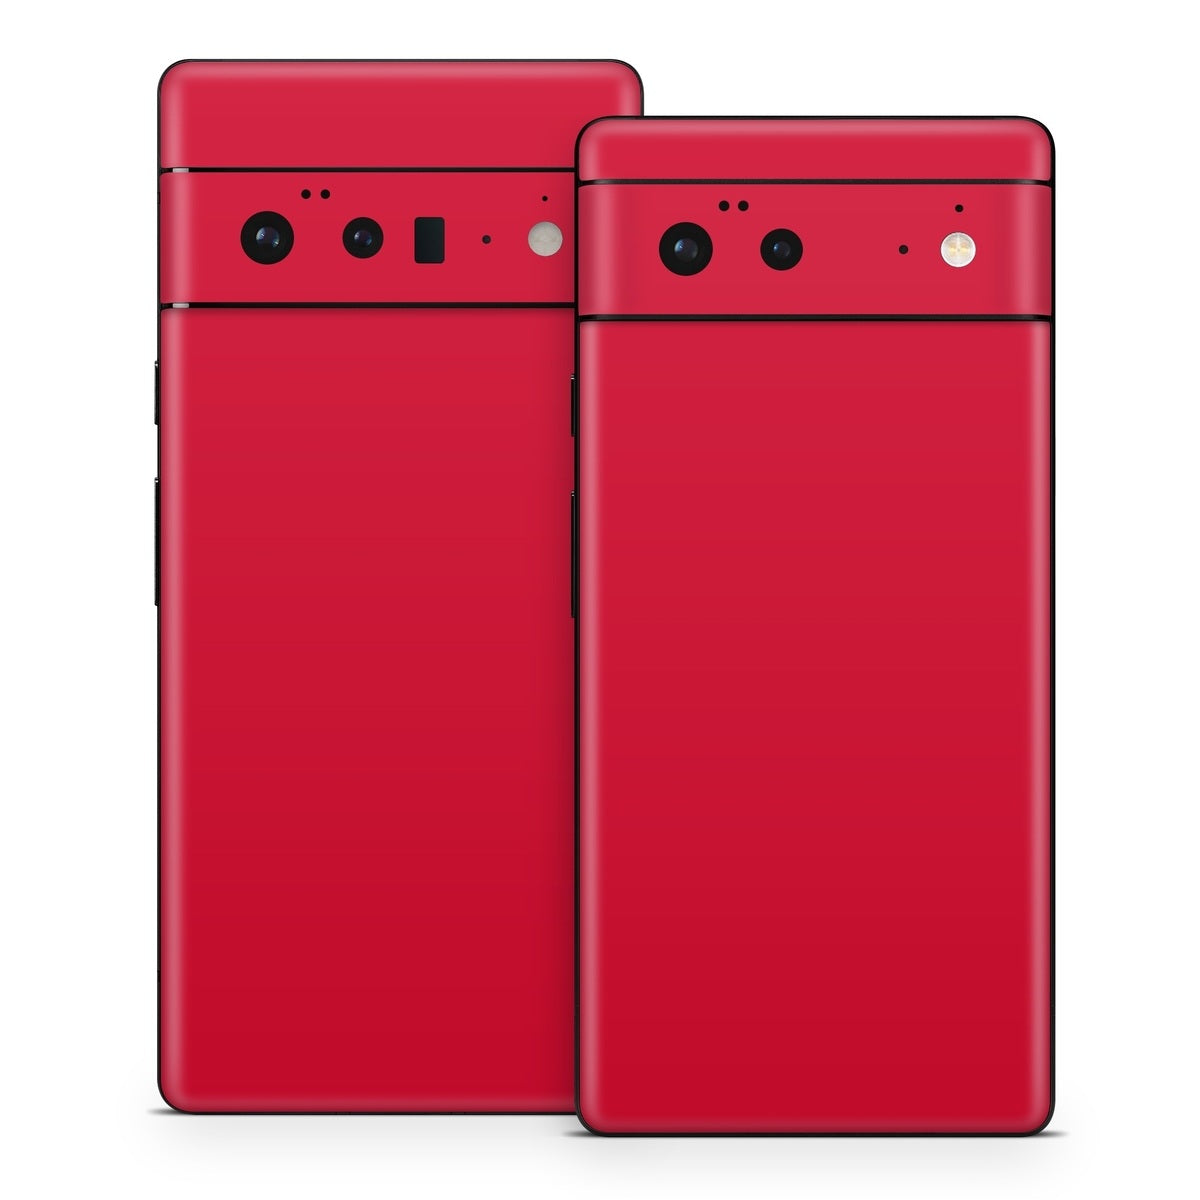 Solid State Red - Google Pixel 6 Skin